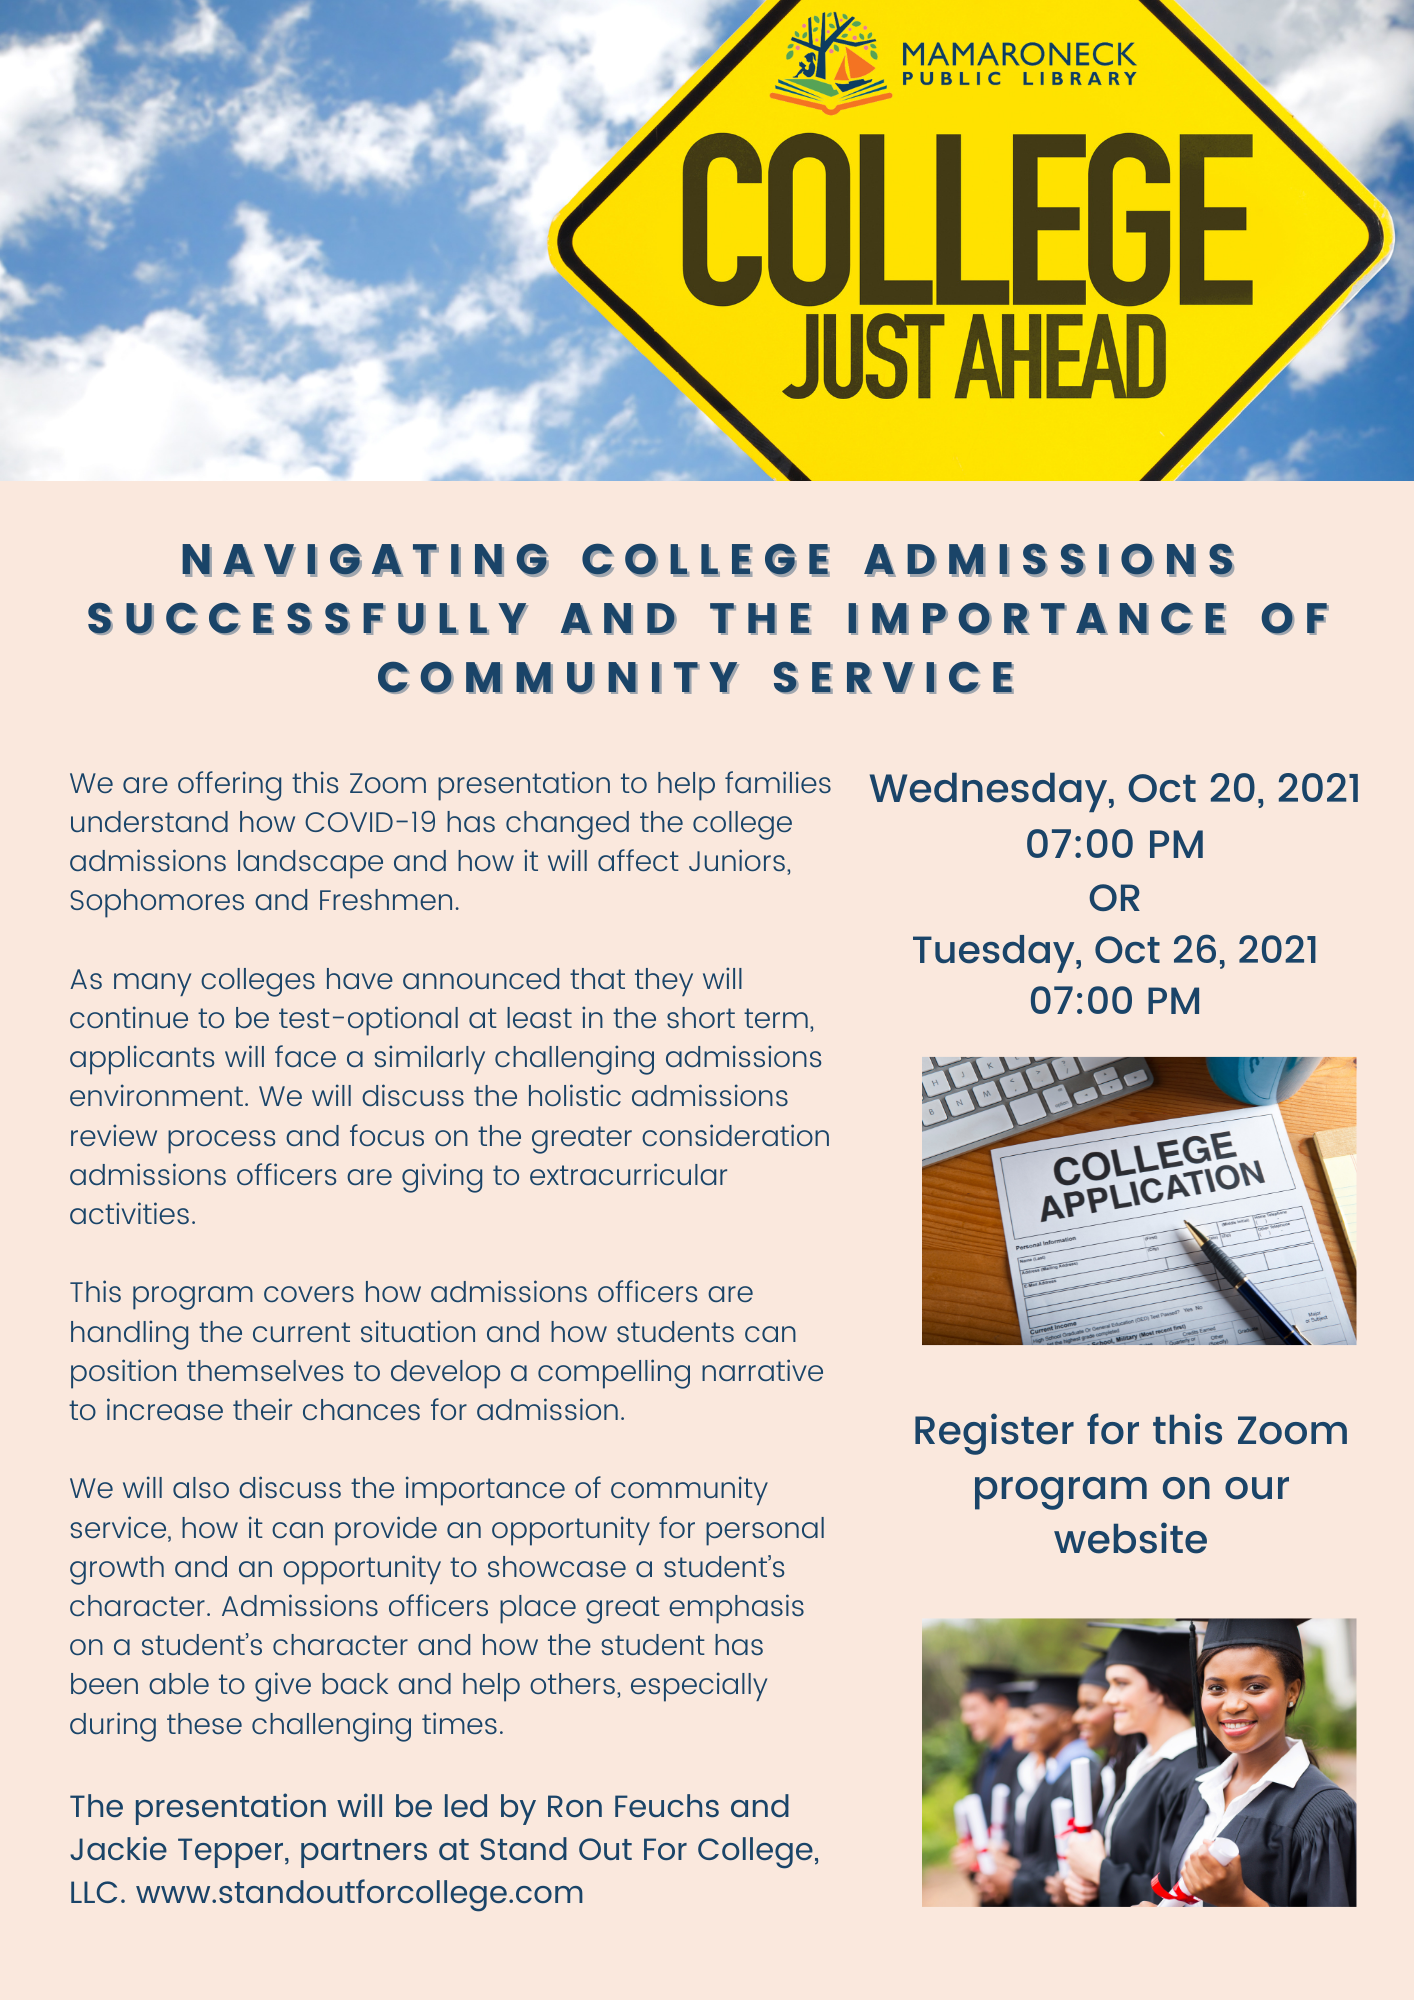 A Zoom presentation to help families understand how COVID-19 has changed the college admissions landscape and how it will affect Juniors, Sophomores and Freshmen.